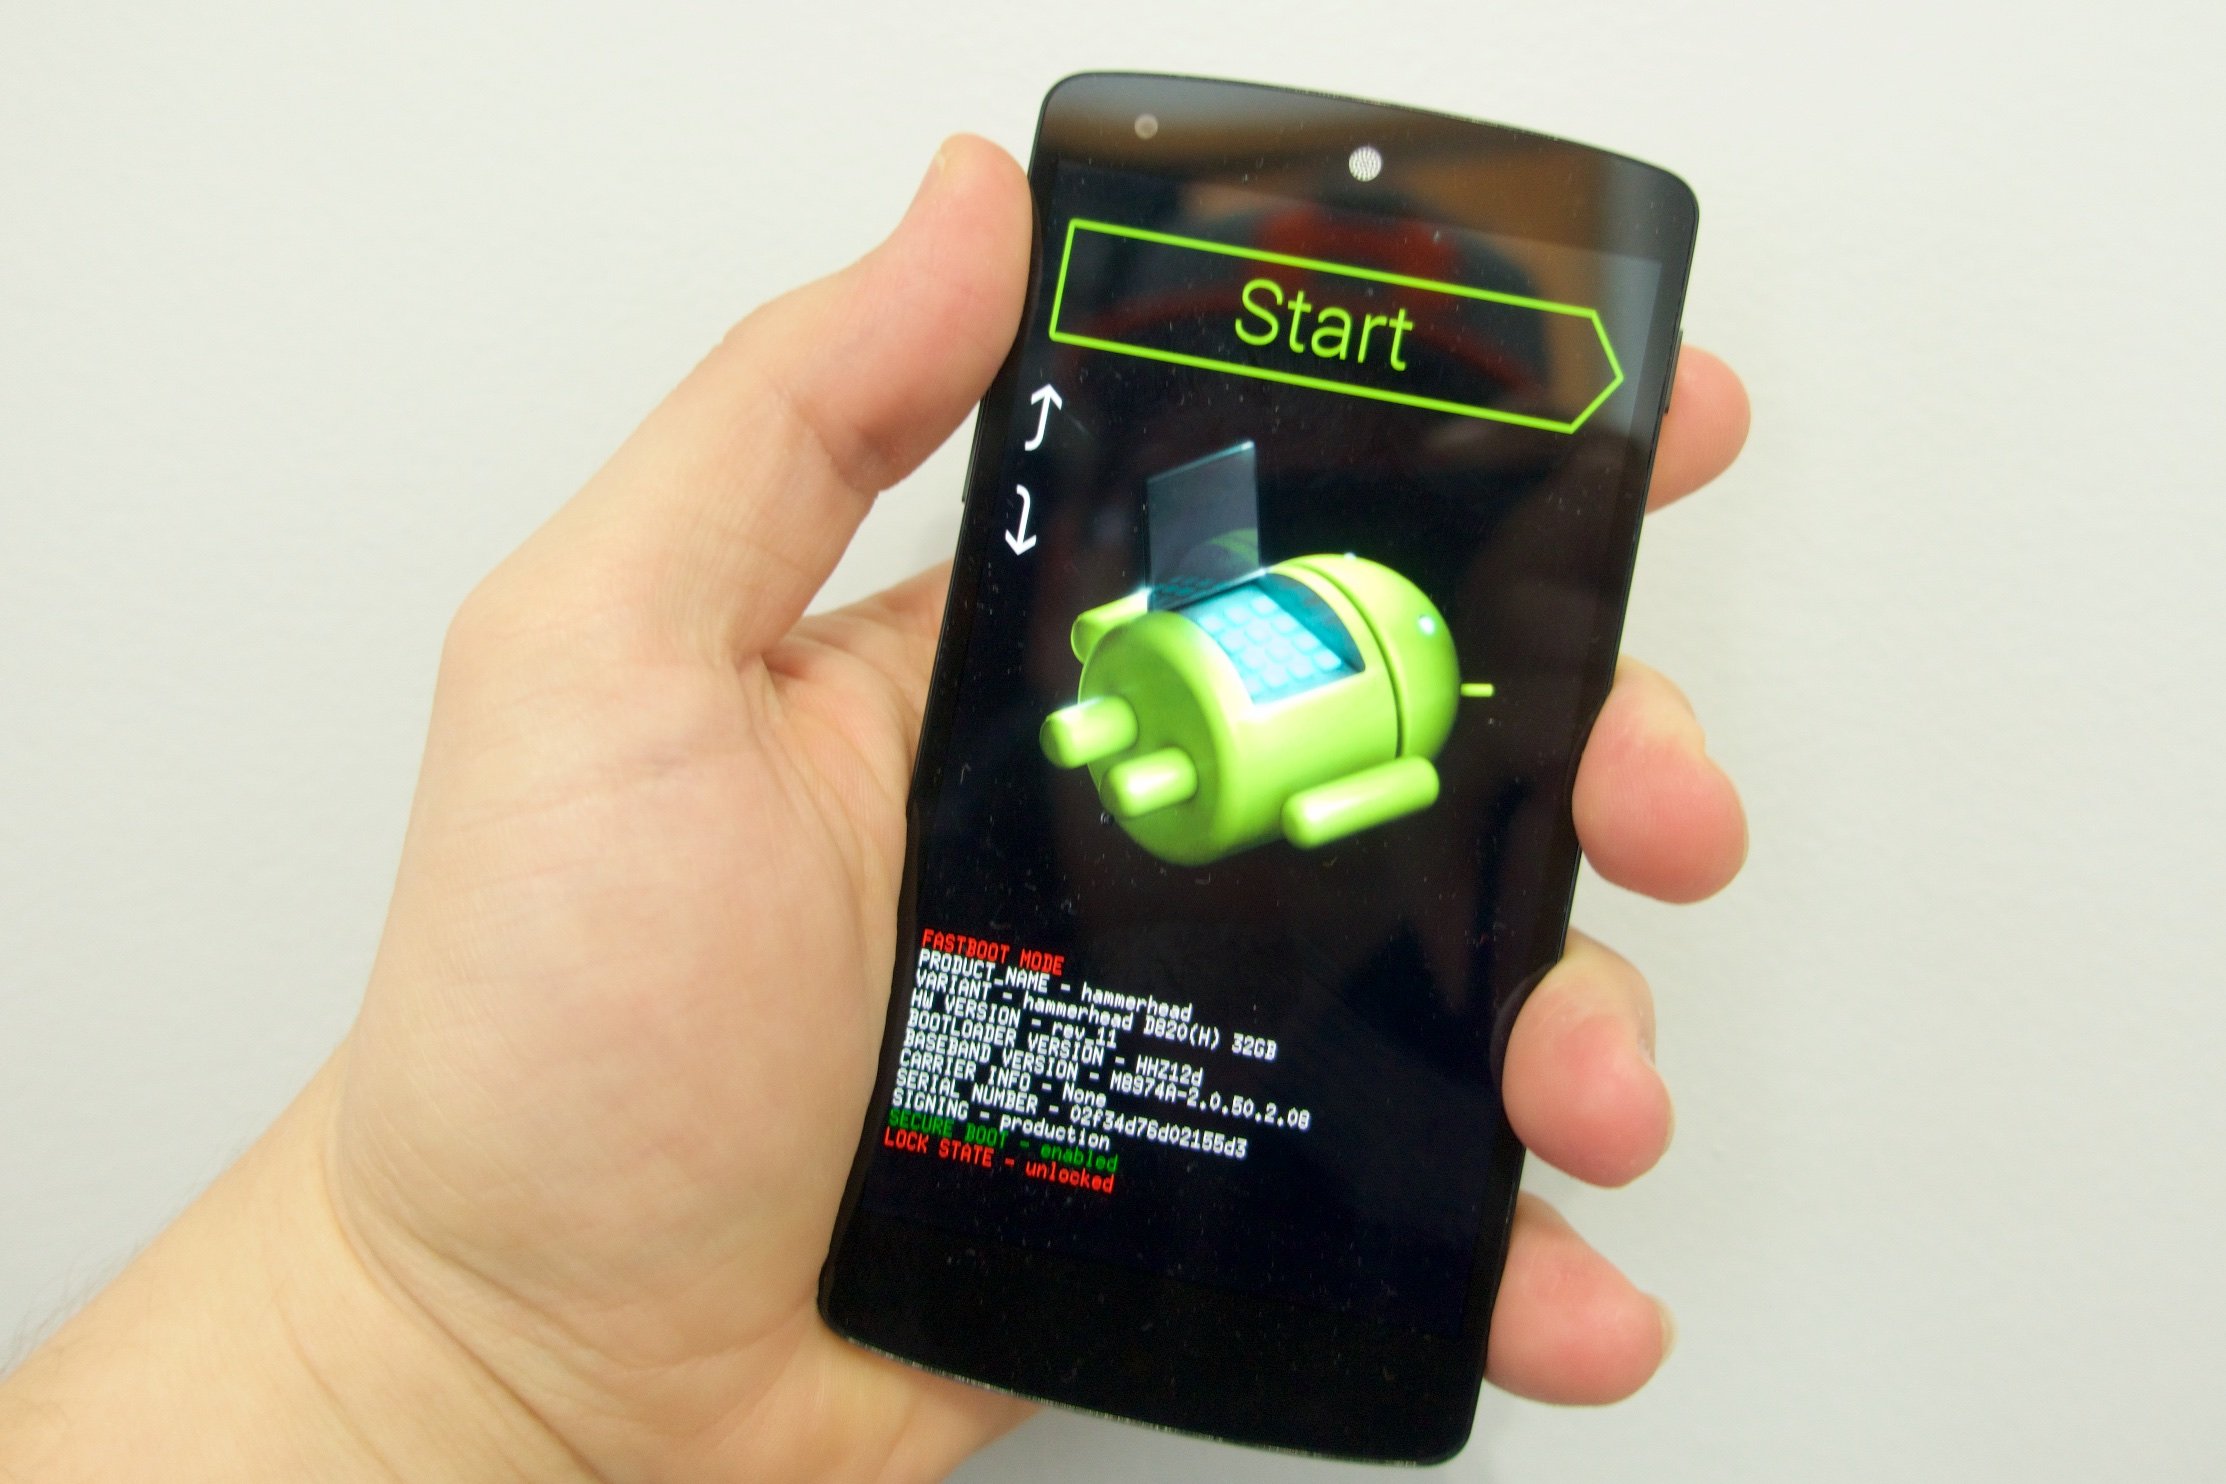 With the Nexus on this screen, you can now start the Android 5.0 downgrade.